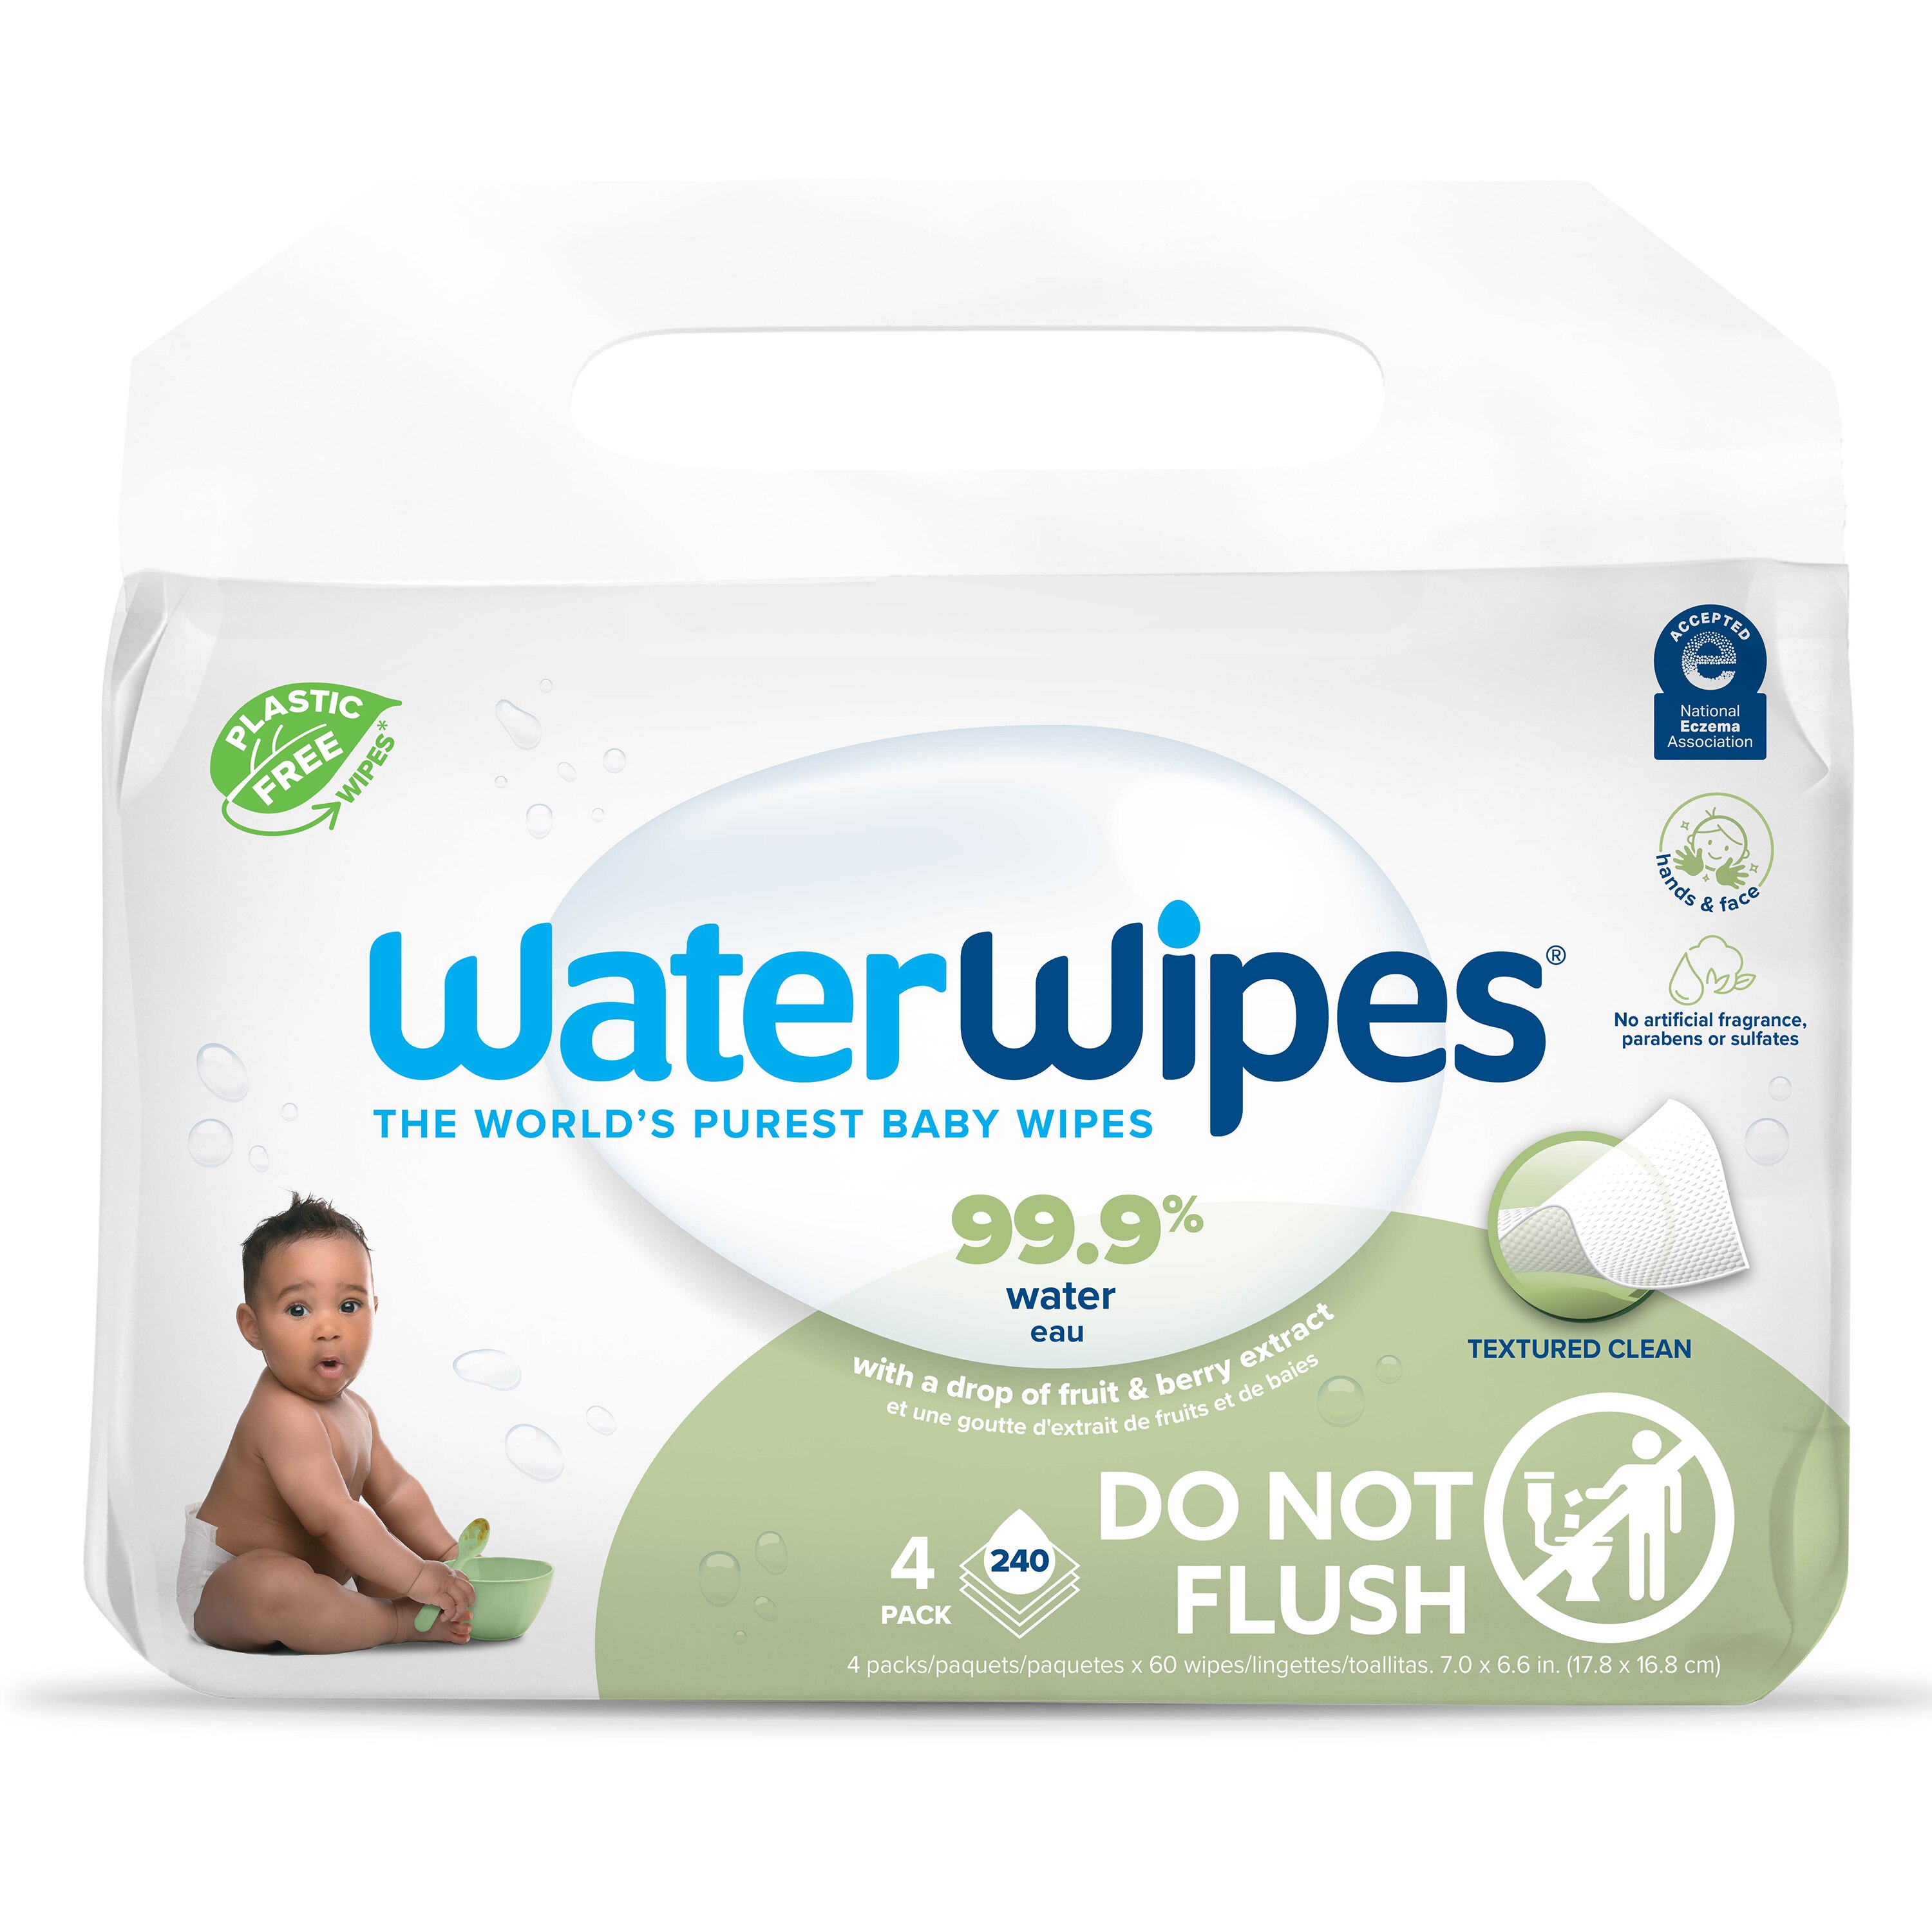 WaterWipes Plastic-Free Textured Clean, Toddler & Baby Wipes, 99.9% Water Based, Sensitive, 240 Count (4 Pack) - 60 Ct , CVS